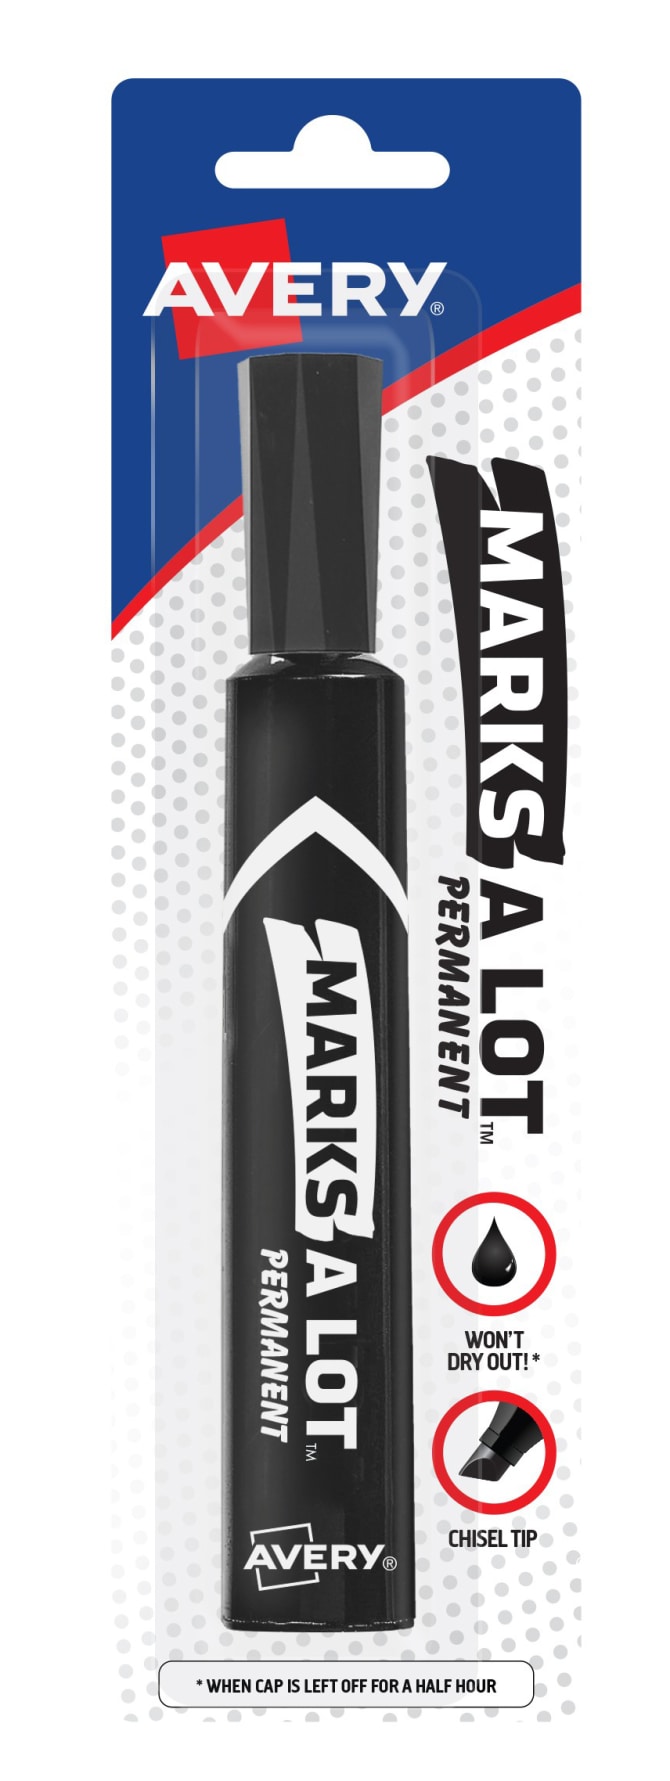 Marks A Lot Marks-A-Lot Permanent Marker, Chisel Point, Black